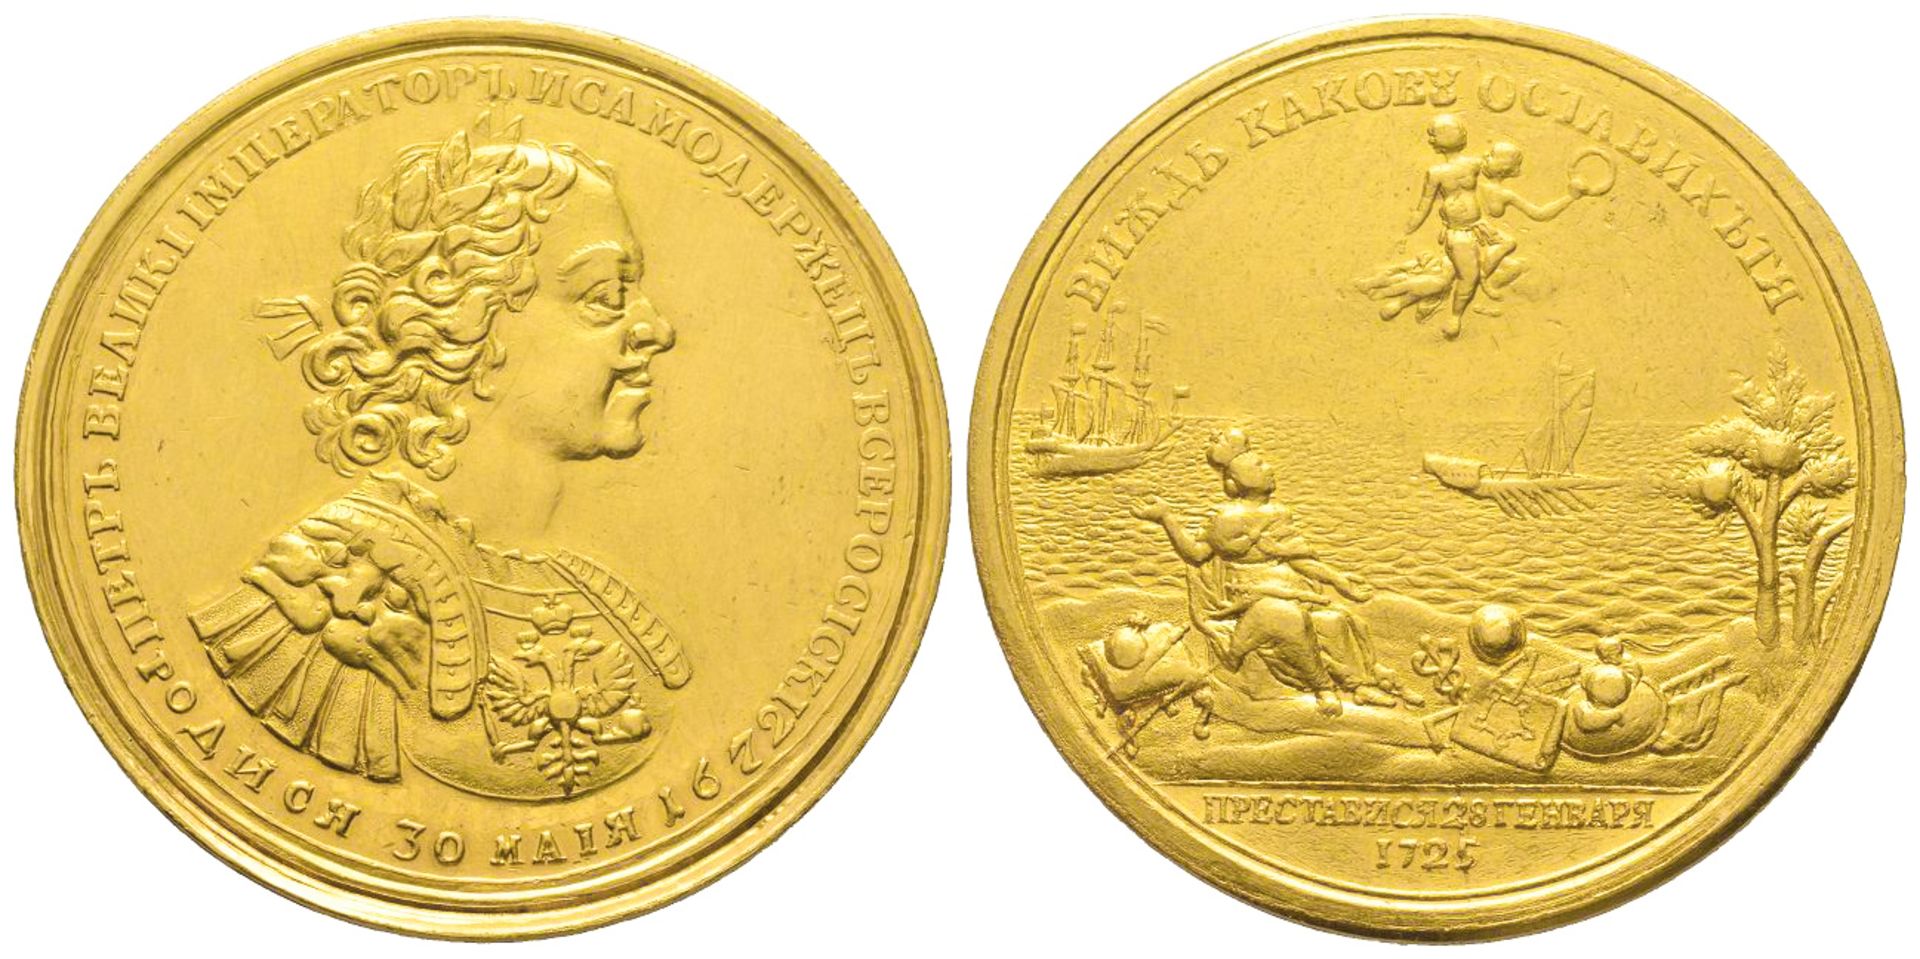 Peter the Great, 1682-1725 - Gold medal, 1725, by Cupy, commemorating his death, AU [...] - Bild 2 aus 3